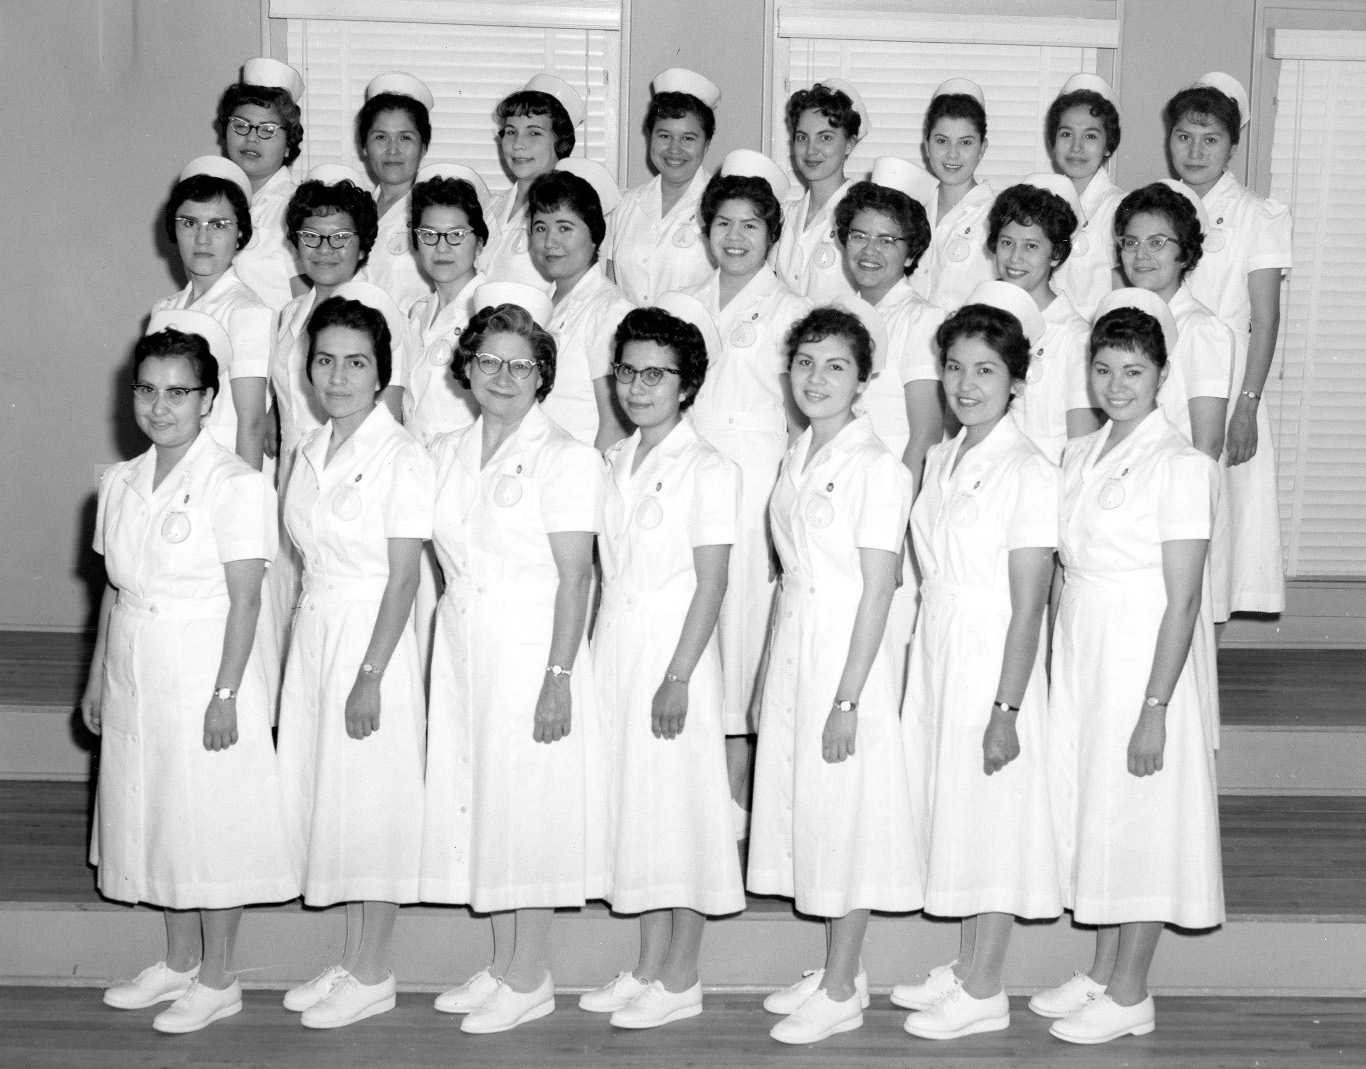 35th graduating class of the Indian School of Practical Nursing, Albuquerque, New Mexico
(National Archives)